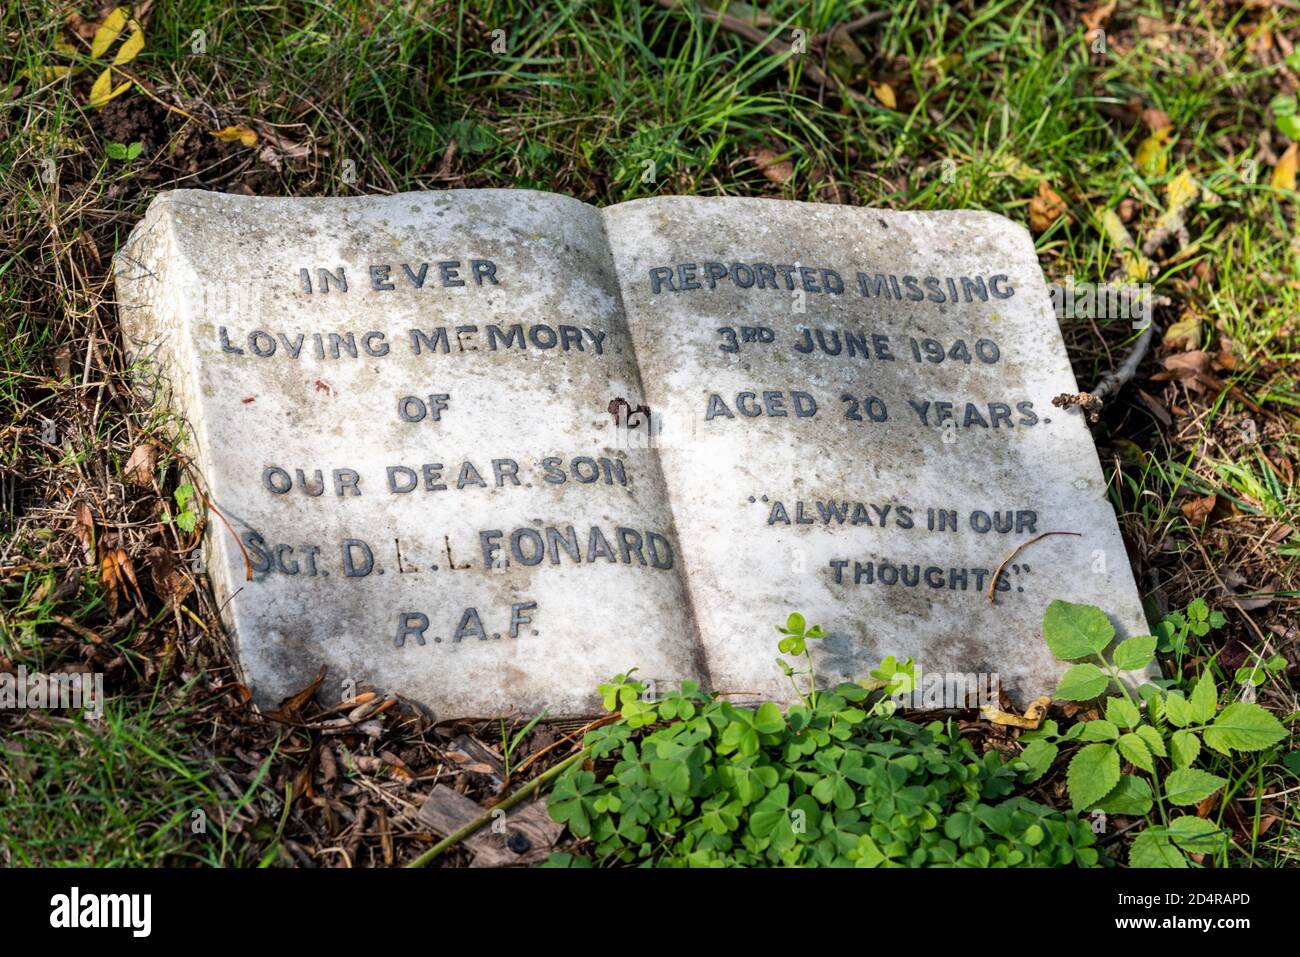 Stone in the form of a book in memory of Sergeant DL Leonard, RAF, reported missing 3 June 1940, aged 20. Battle P2269 shot down by anti-aircraft fire Stock Photo